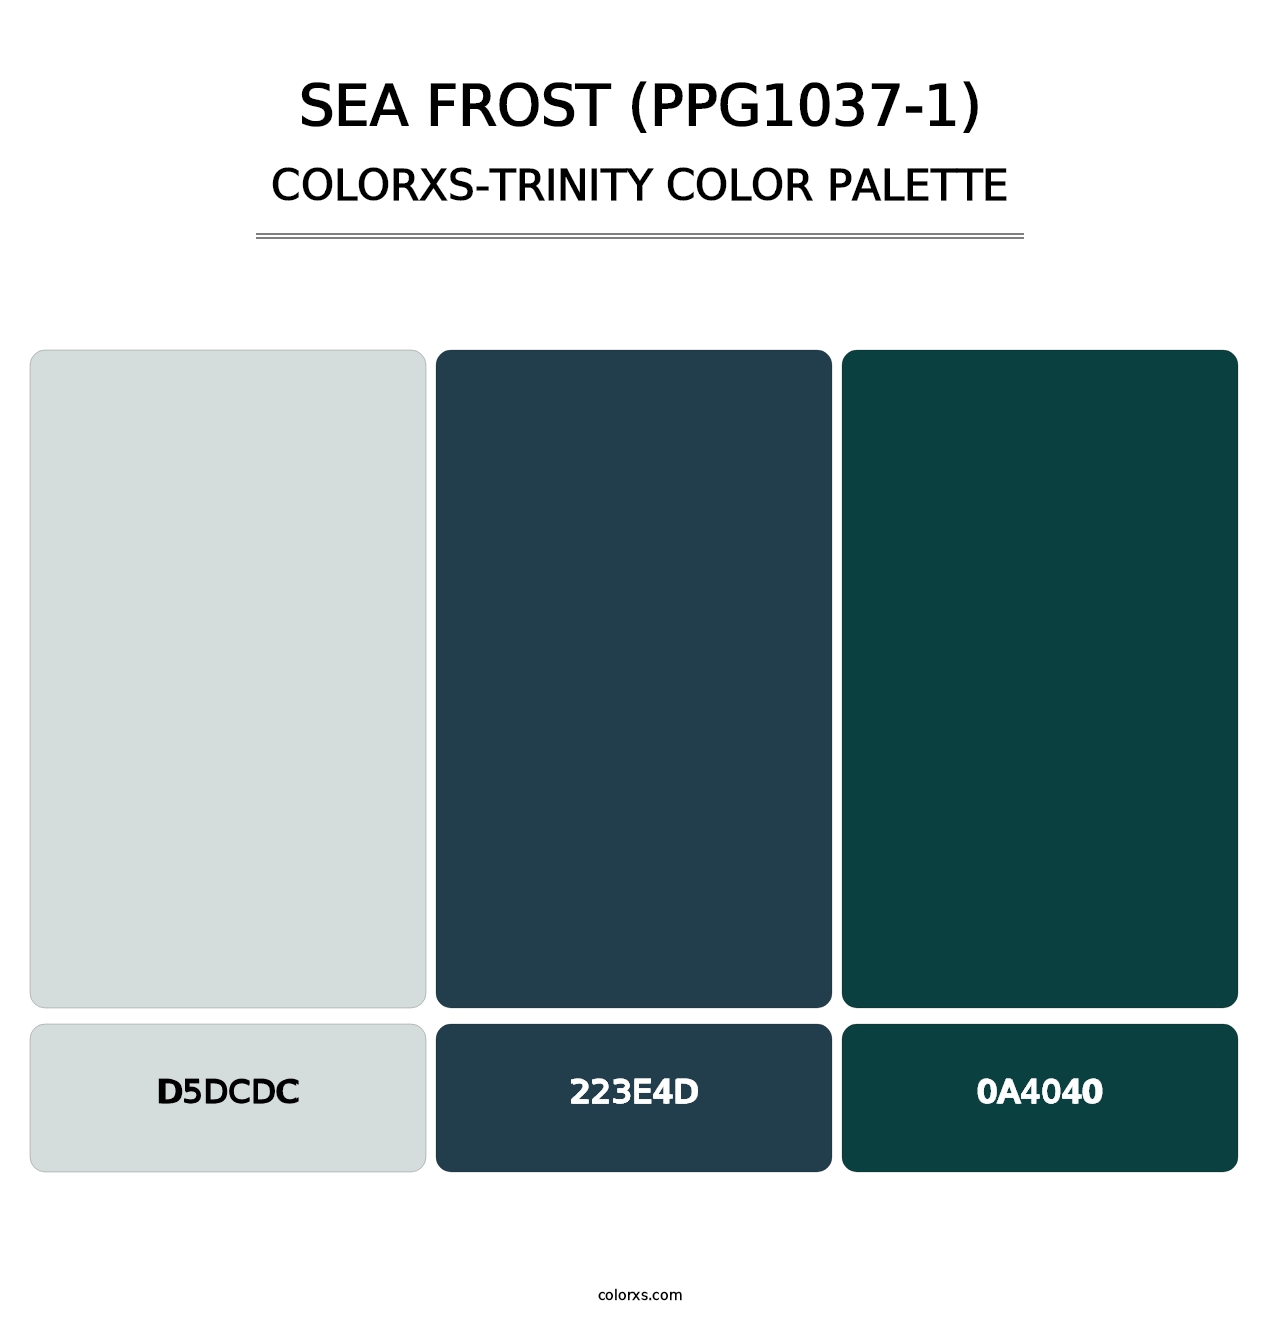 Sea Frost (PPG1037-1) - Colorxs Trinity Palette